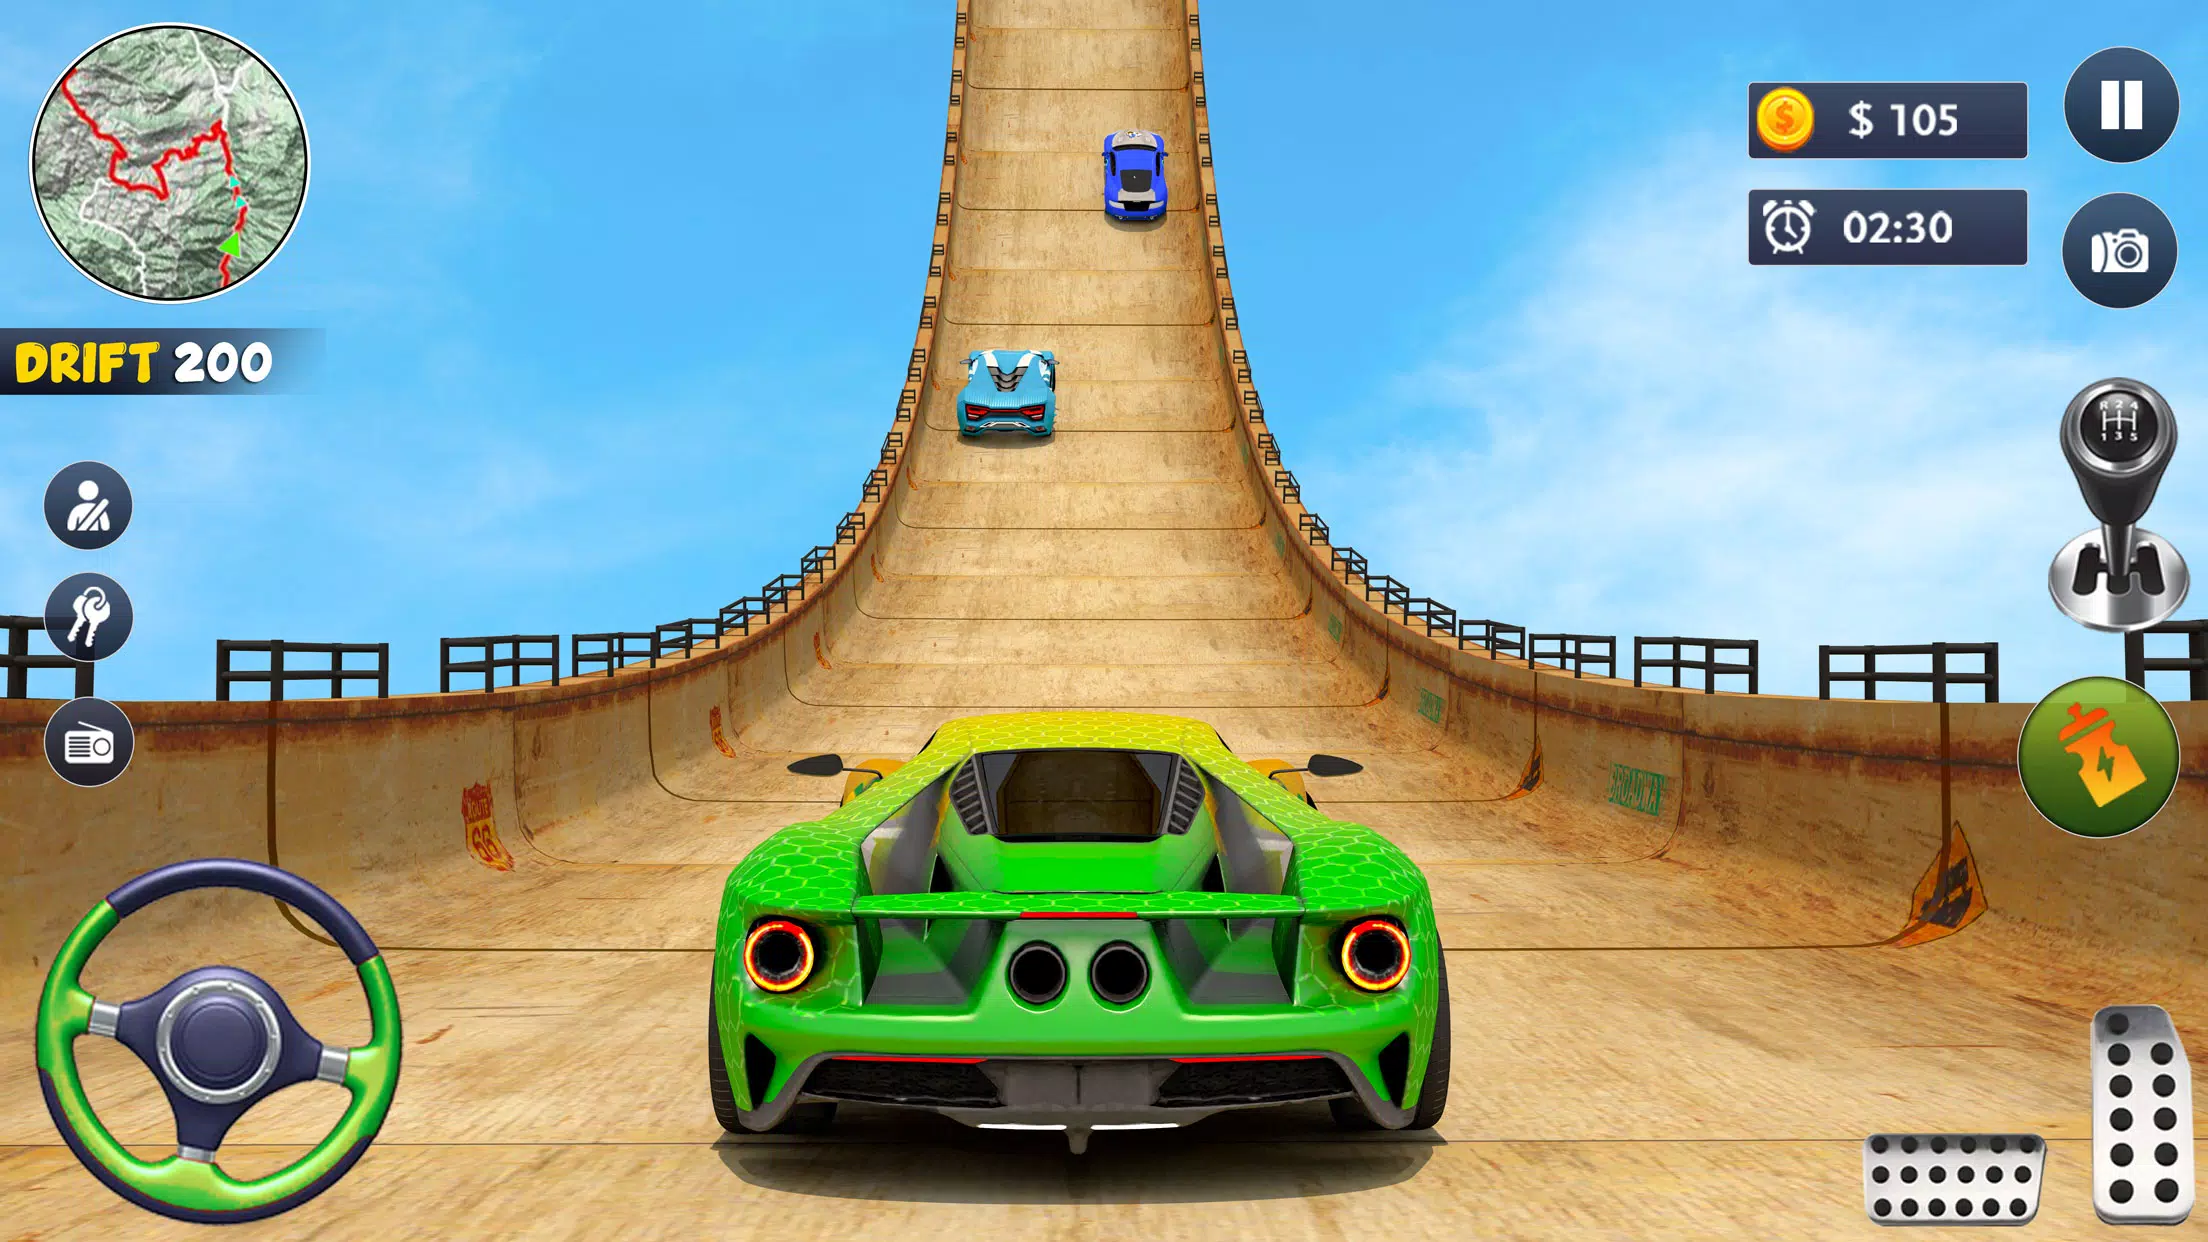 Ramp Jumping - On Sports Cars